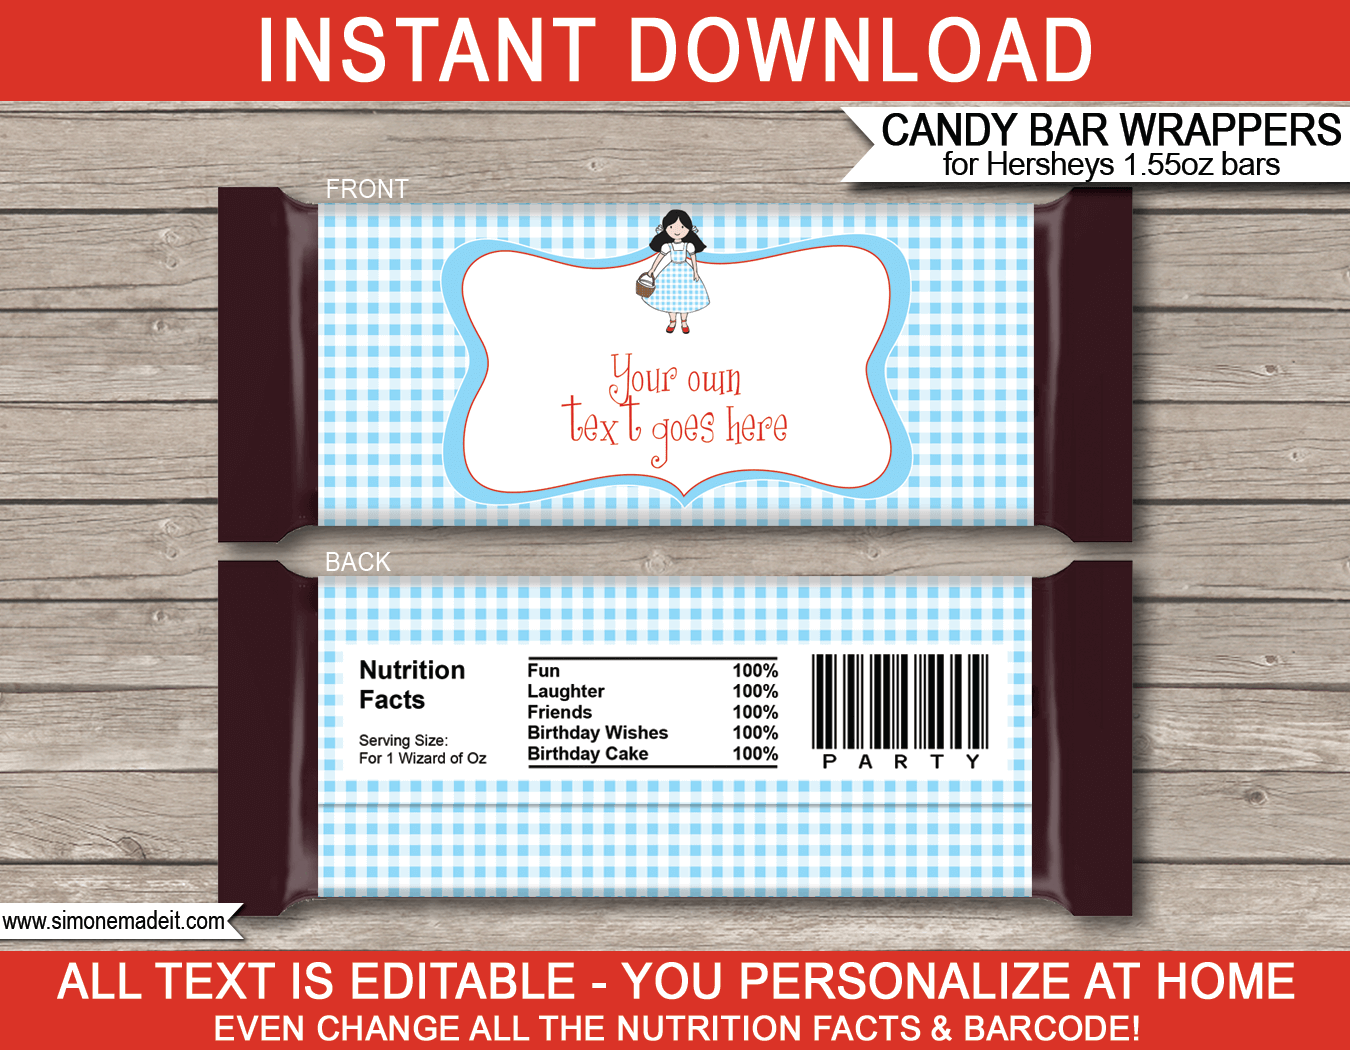 Wizard of Oz Hershey Candy Bar Wrappers | Birthday Party Favors | Personalized Candy Bars | Editable Template | INSTANT DOWNLOAD $3.00 via simonemadeit.com